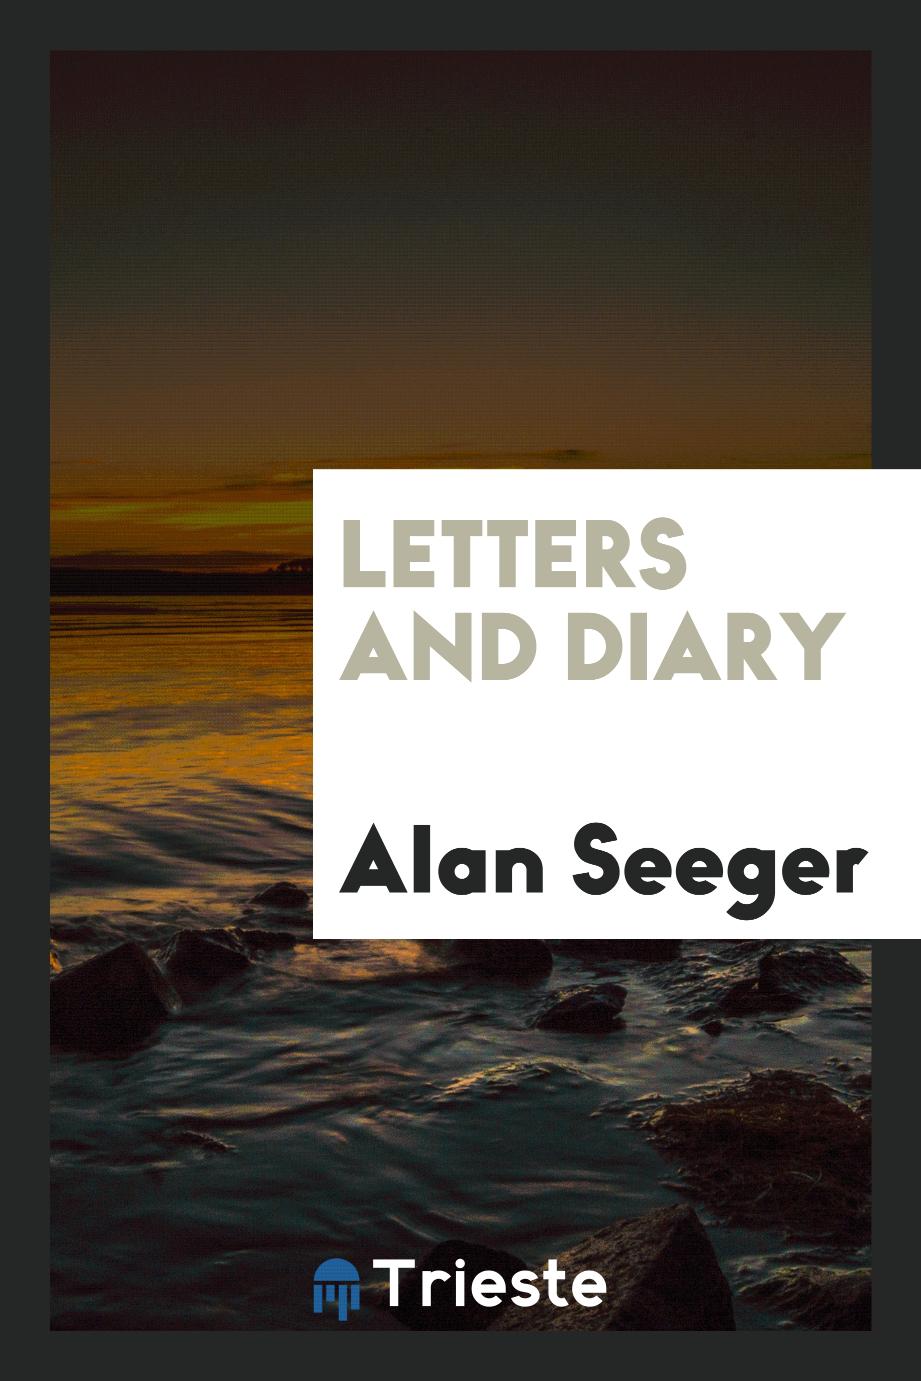 Letters and diary